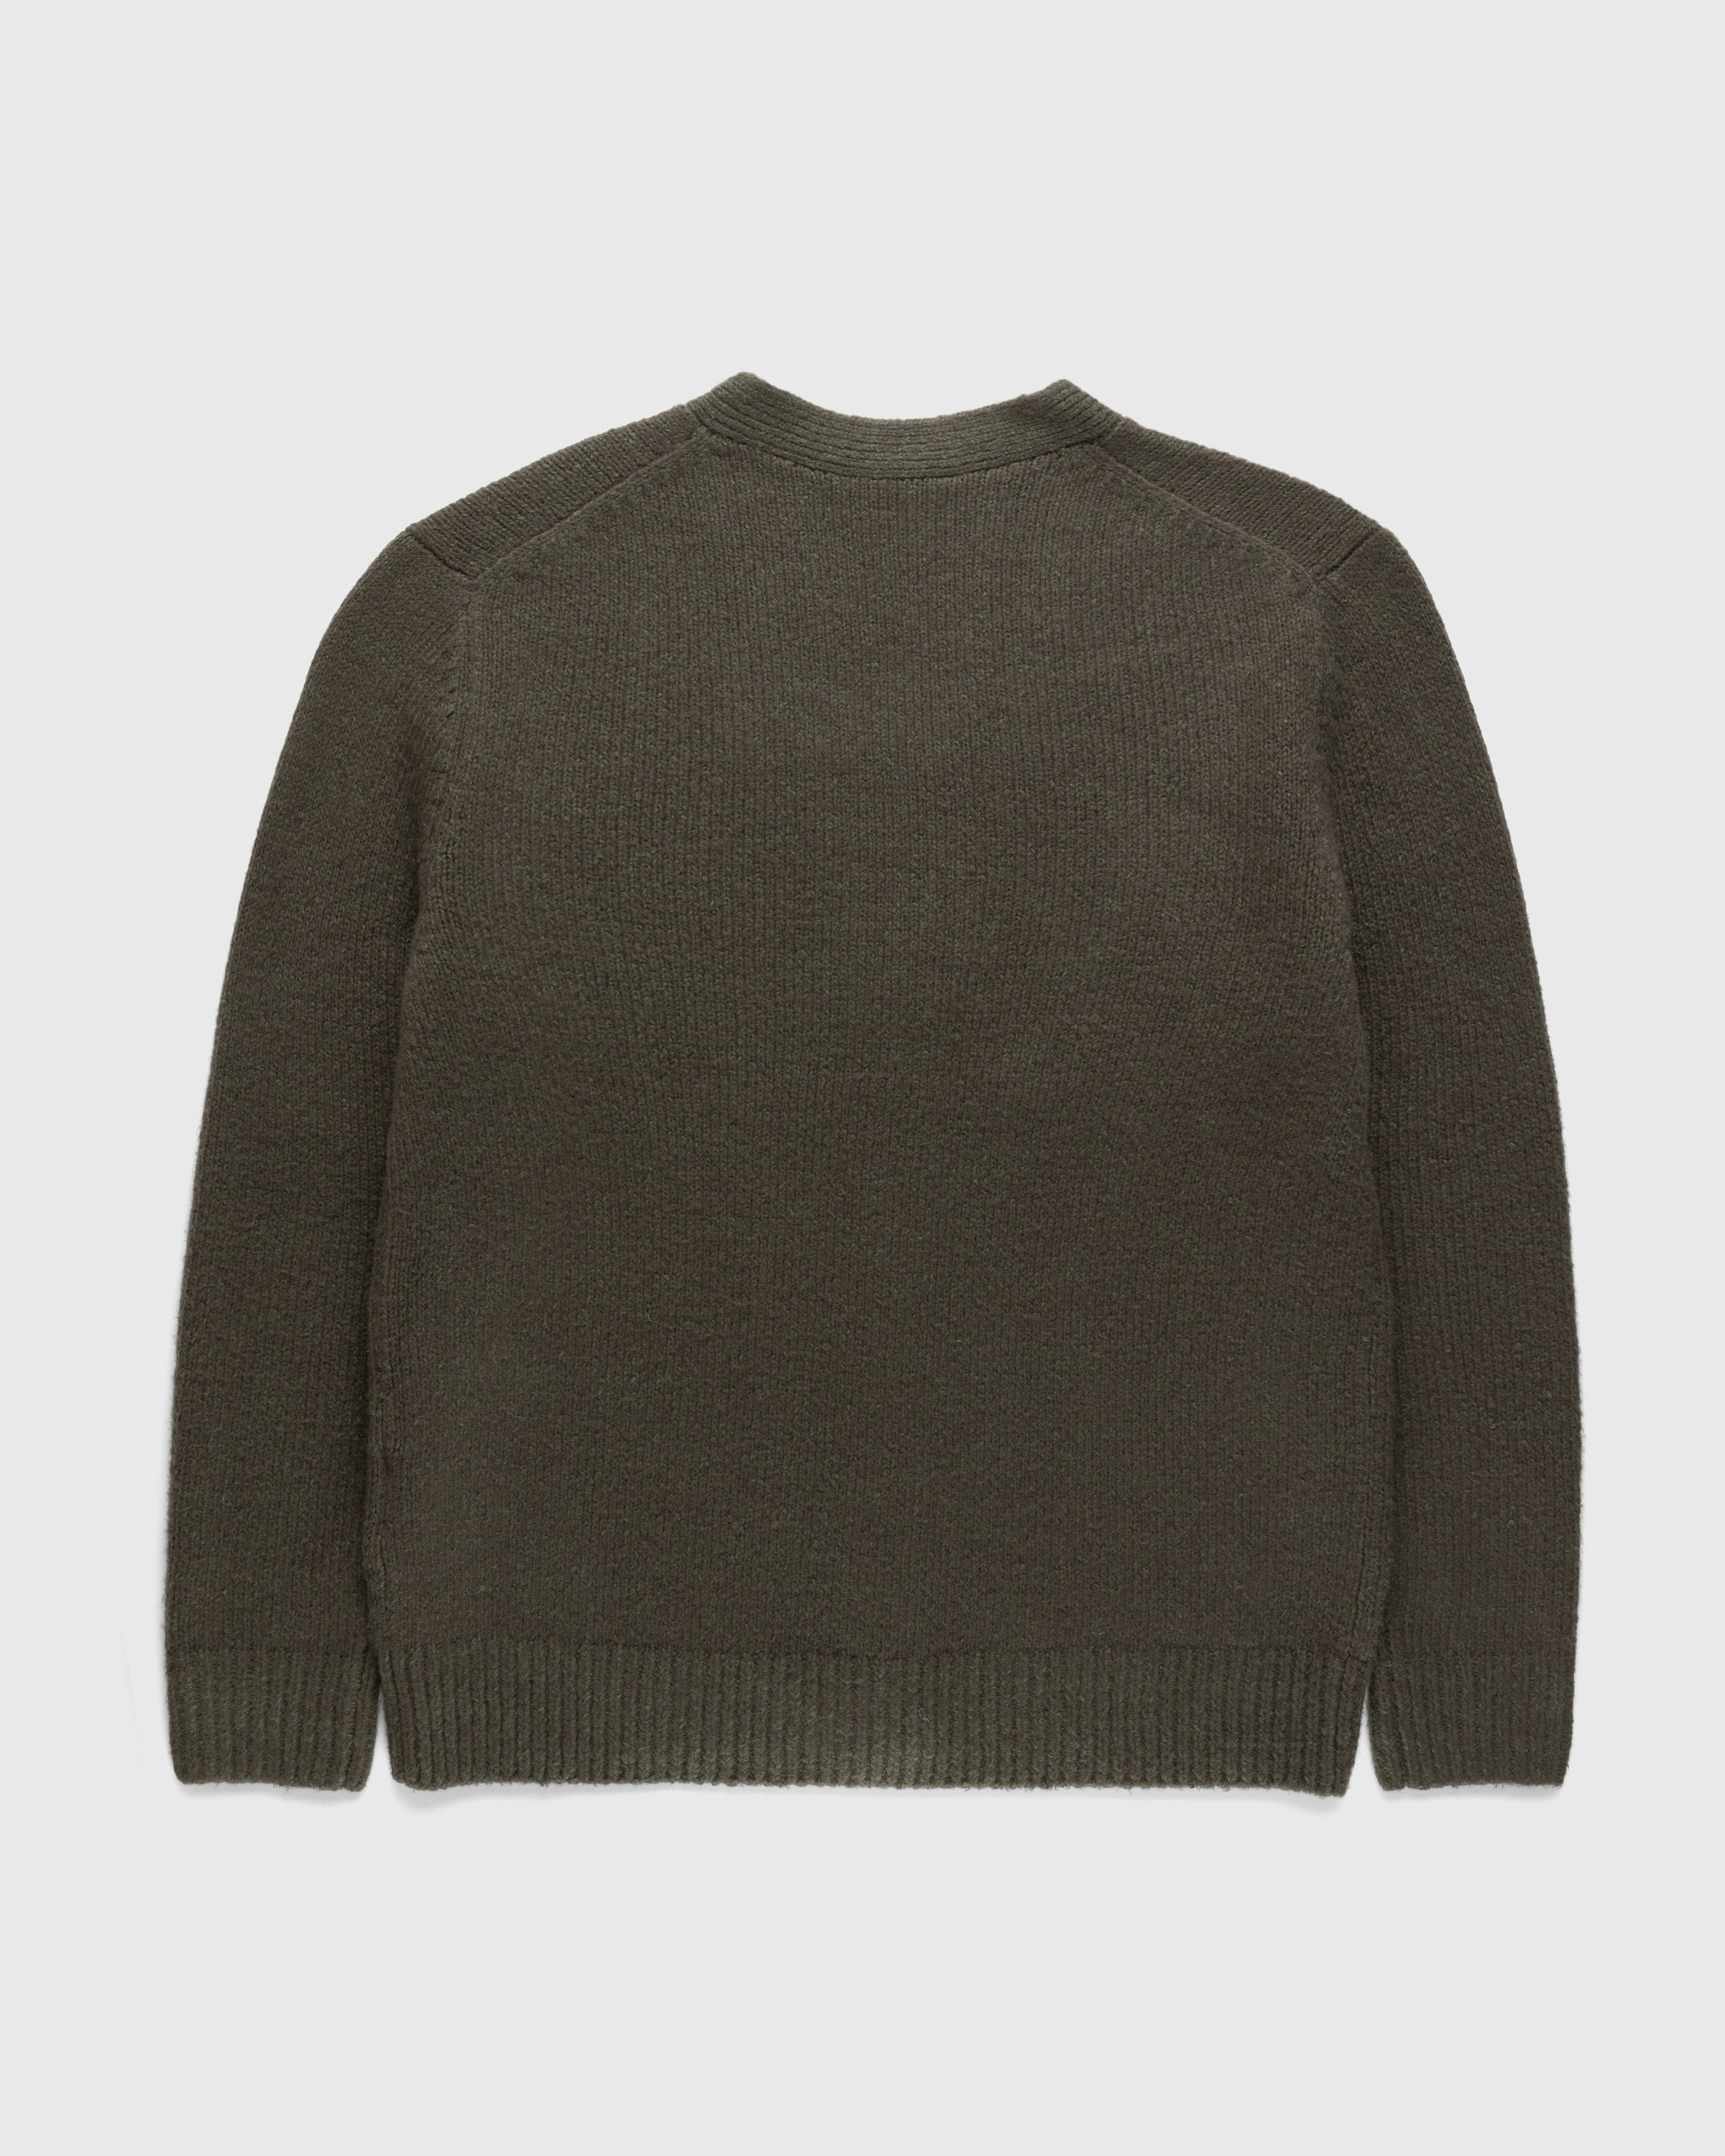 Acne Studios - Wool Blend V-Neck Cardigan Sweater Forest Green - Clothing - Grey - Image 2